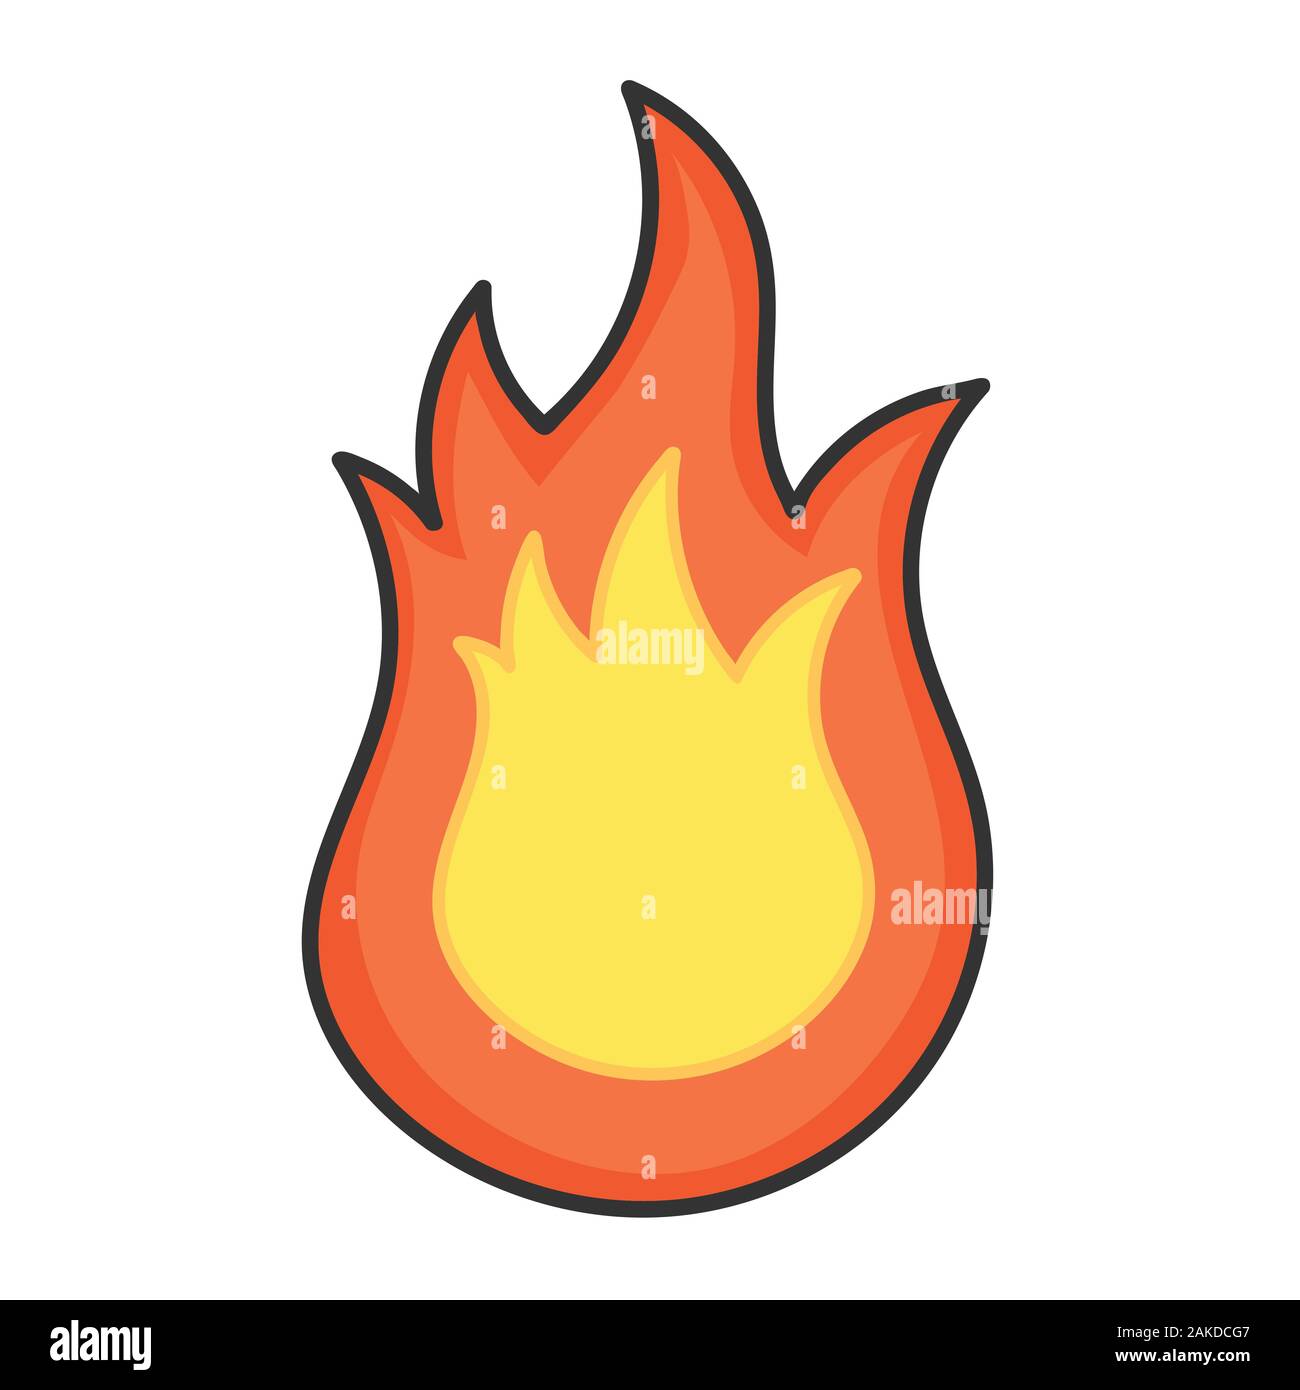 tailieuXANH - Easy Step by Step Cartoon Fire Drawing